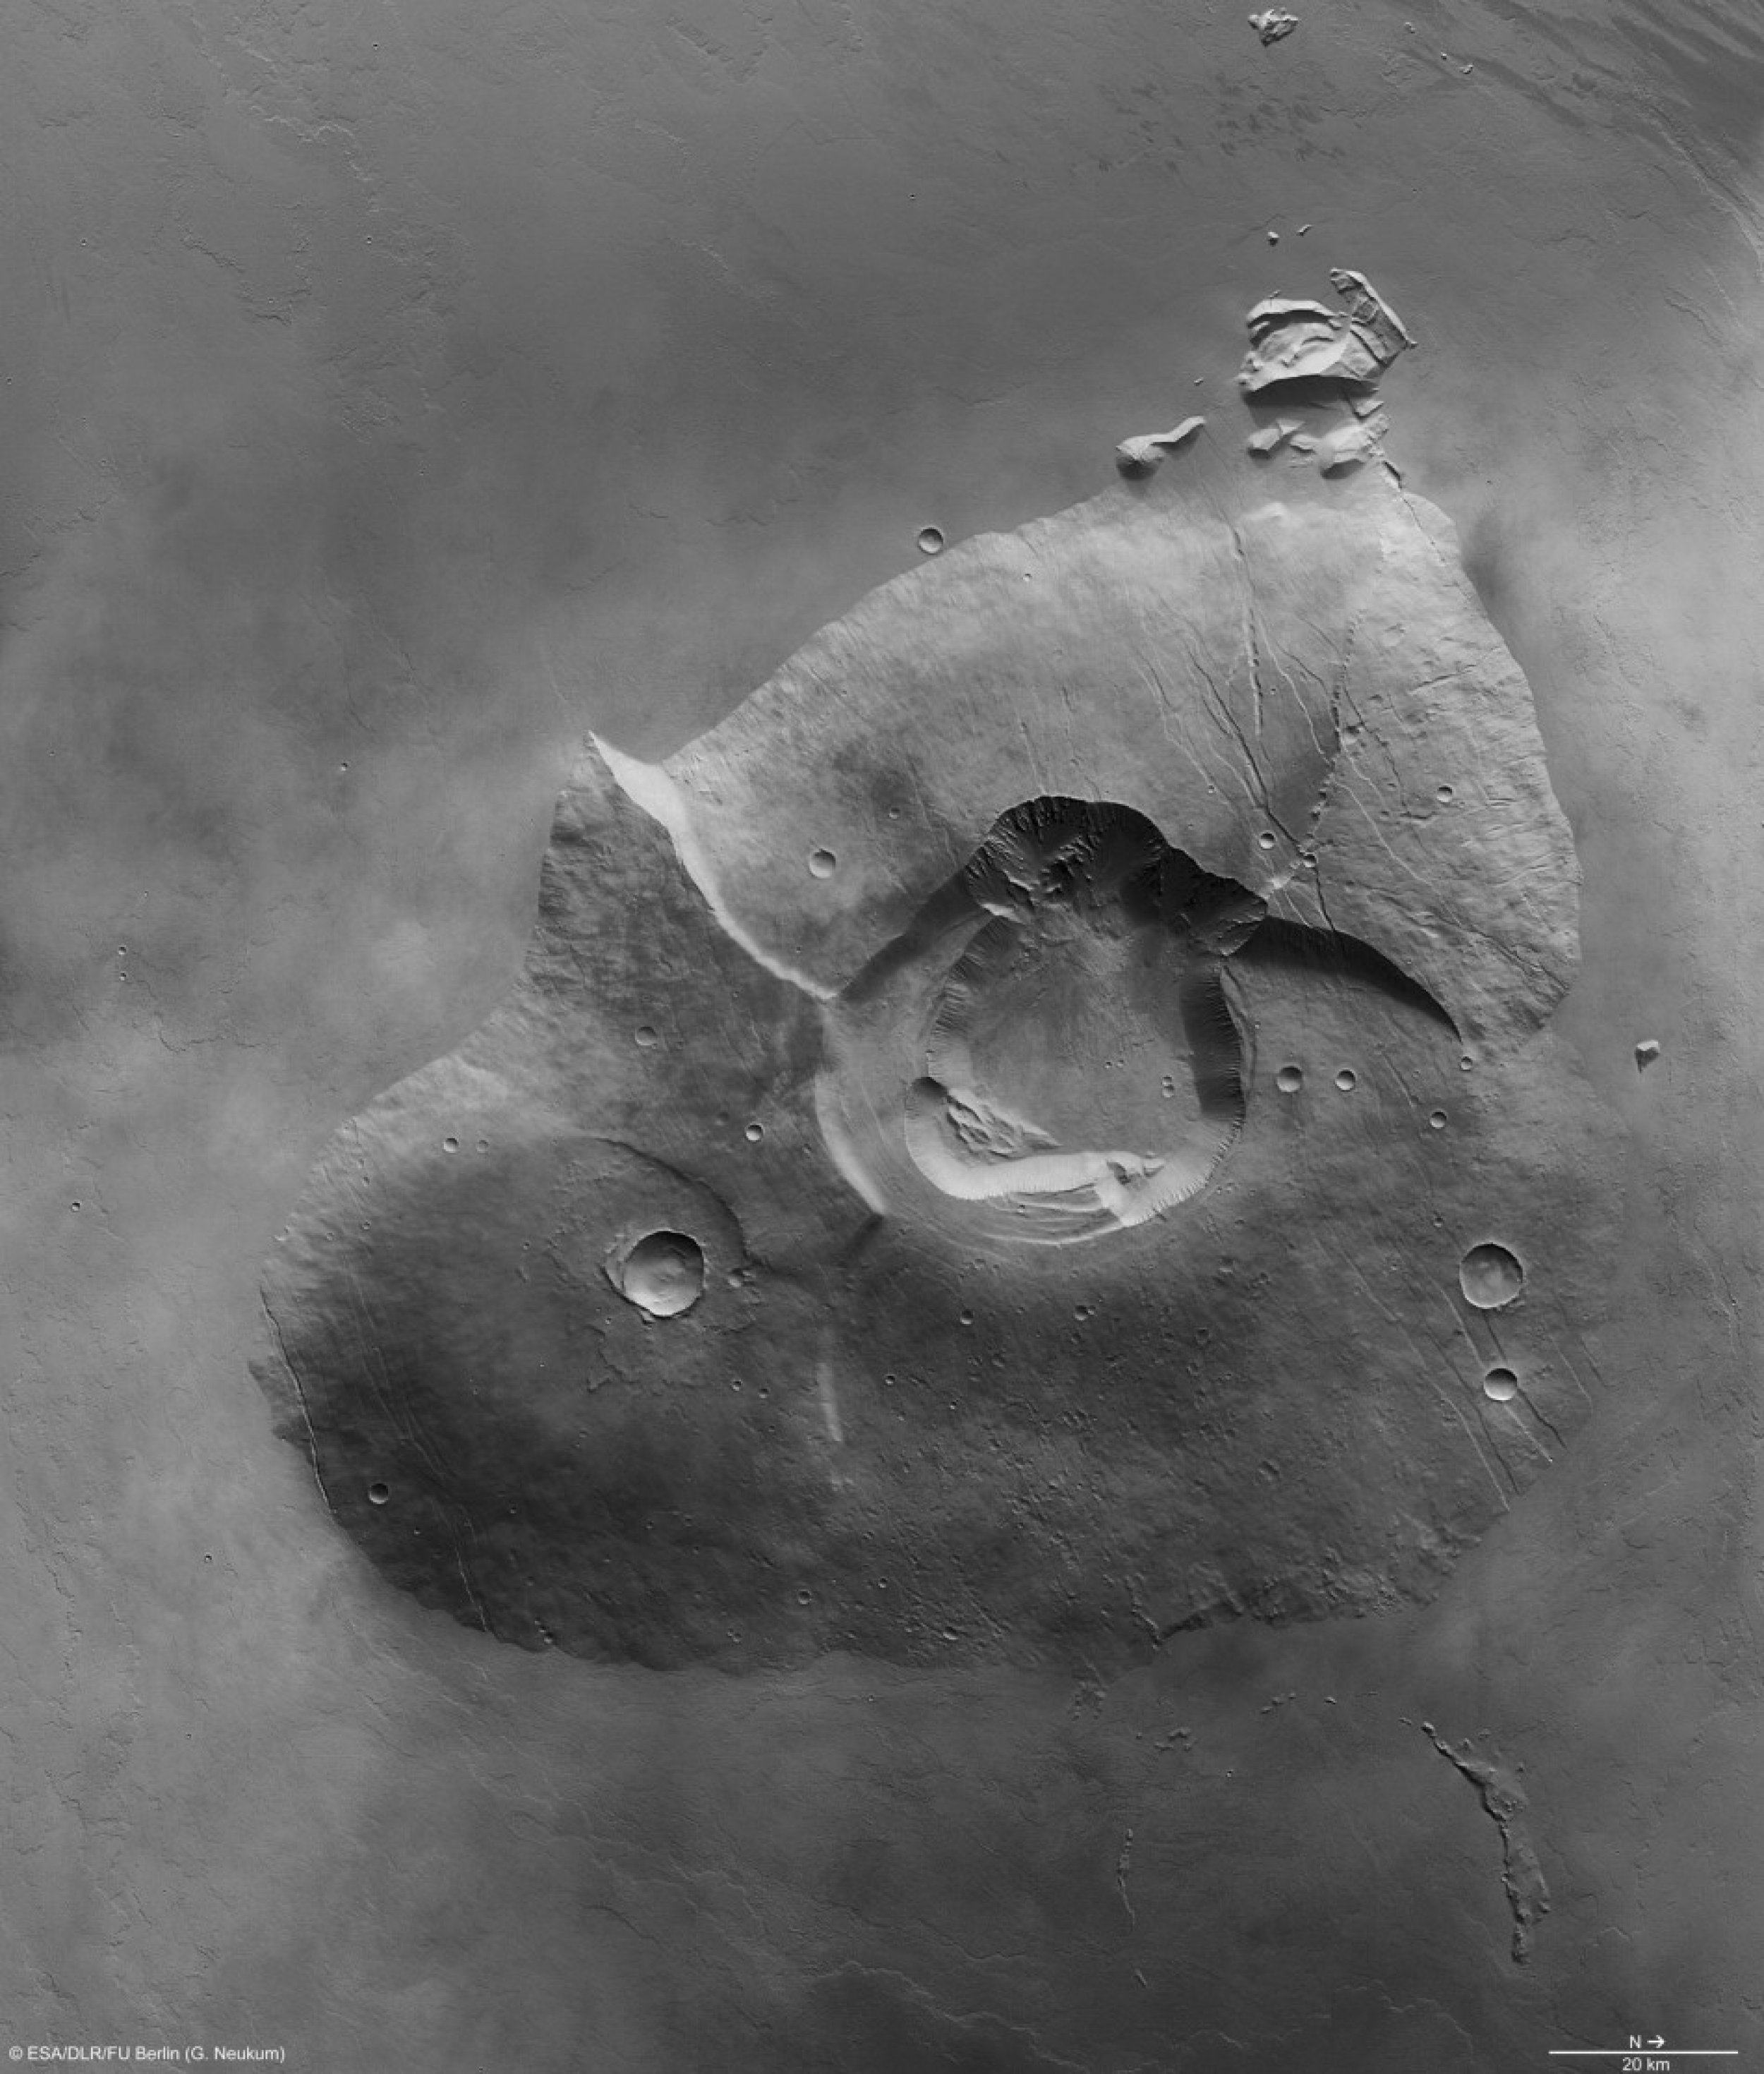 Four-Billion-Year Old 039Unusual039 Battered Volcano Found on Mars